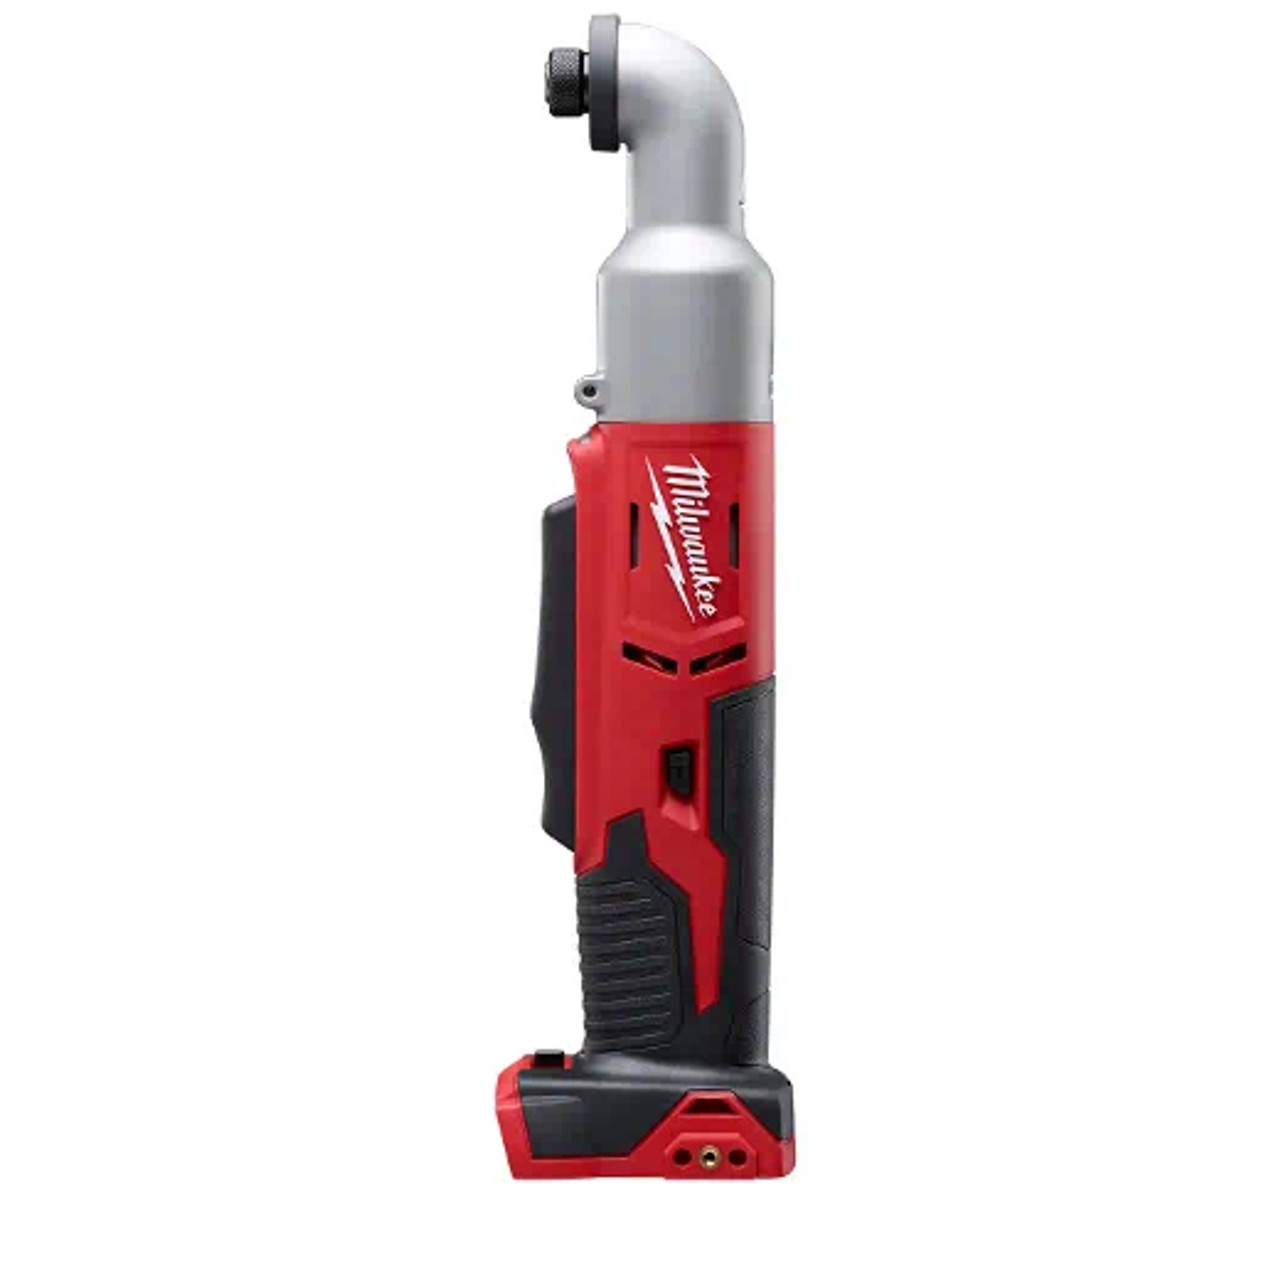 M18 Cordless 2-Speed 1/4" Right Angle Impact Driver (Bare Tool)